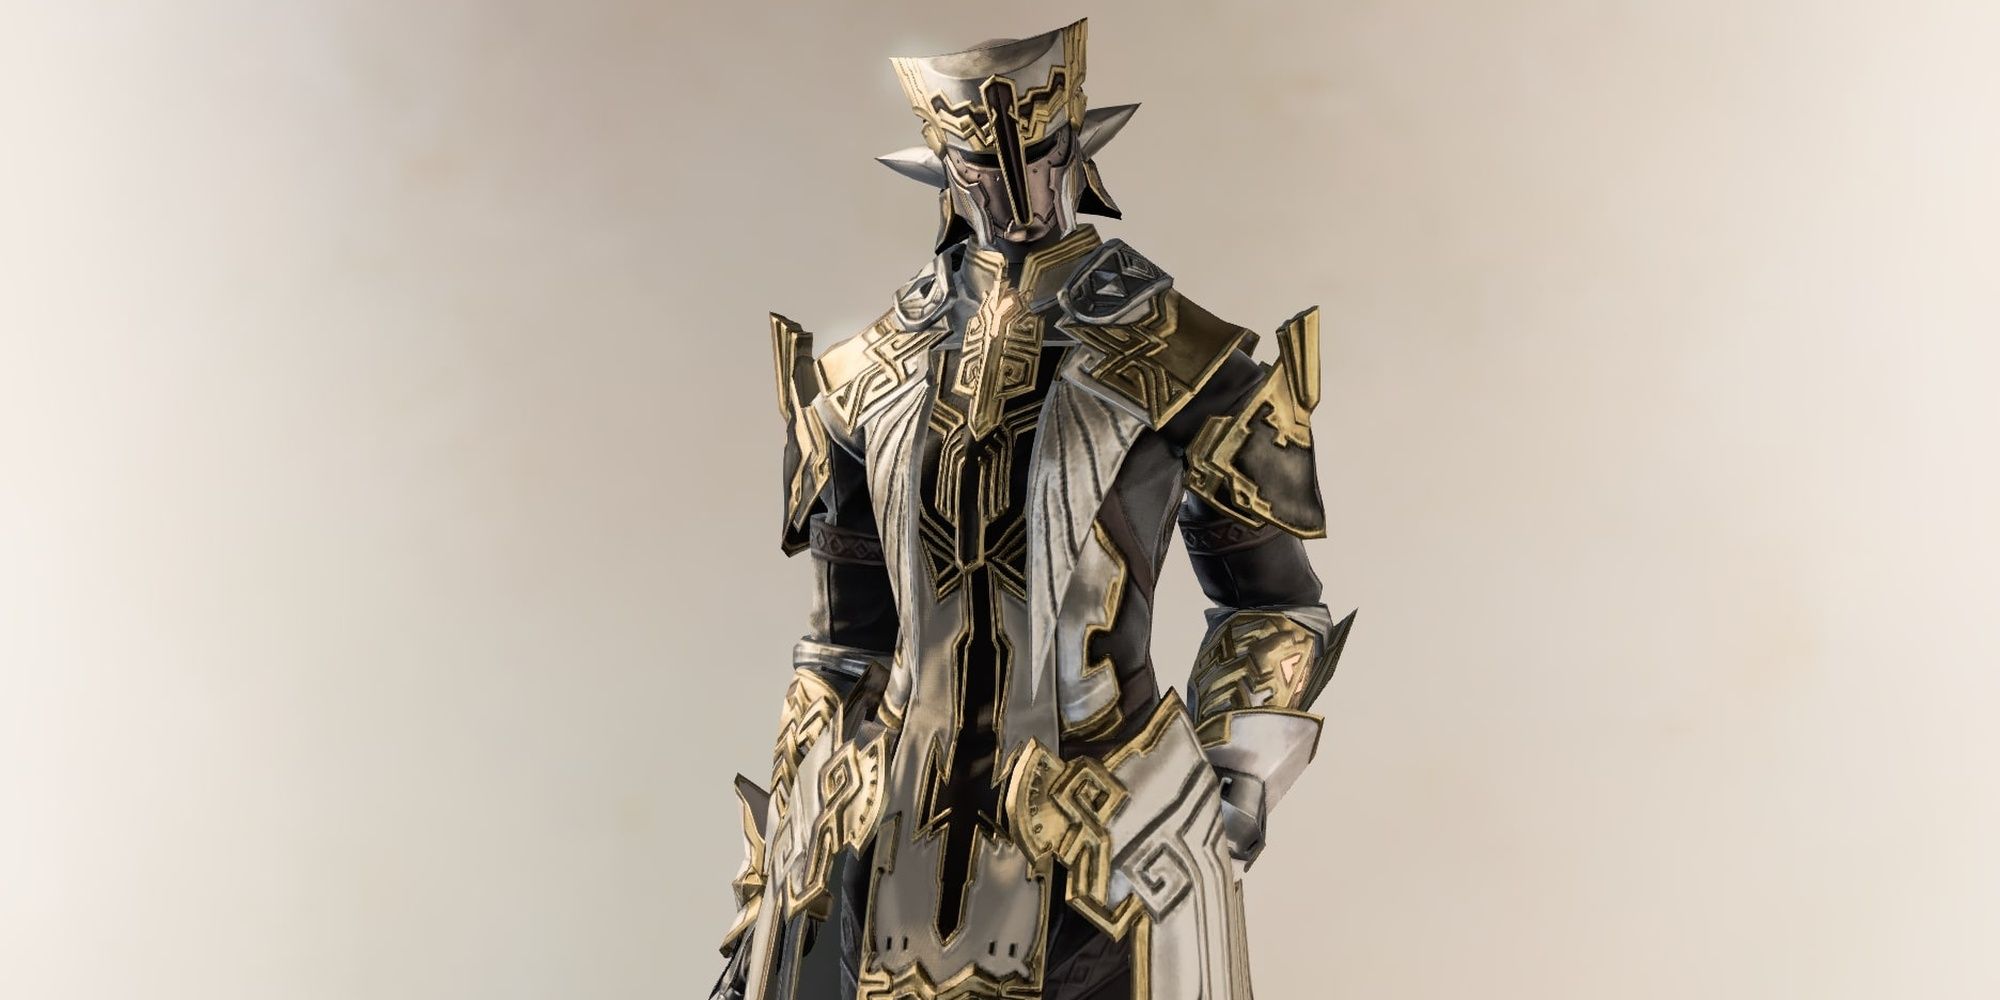 Final Fantasy 14 Character in Ronkan Armor Against an Off-White Background